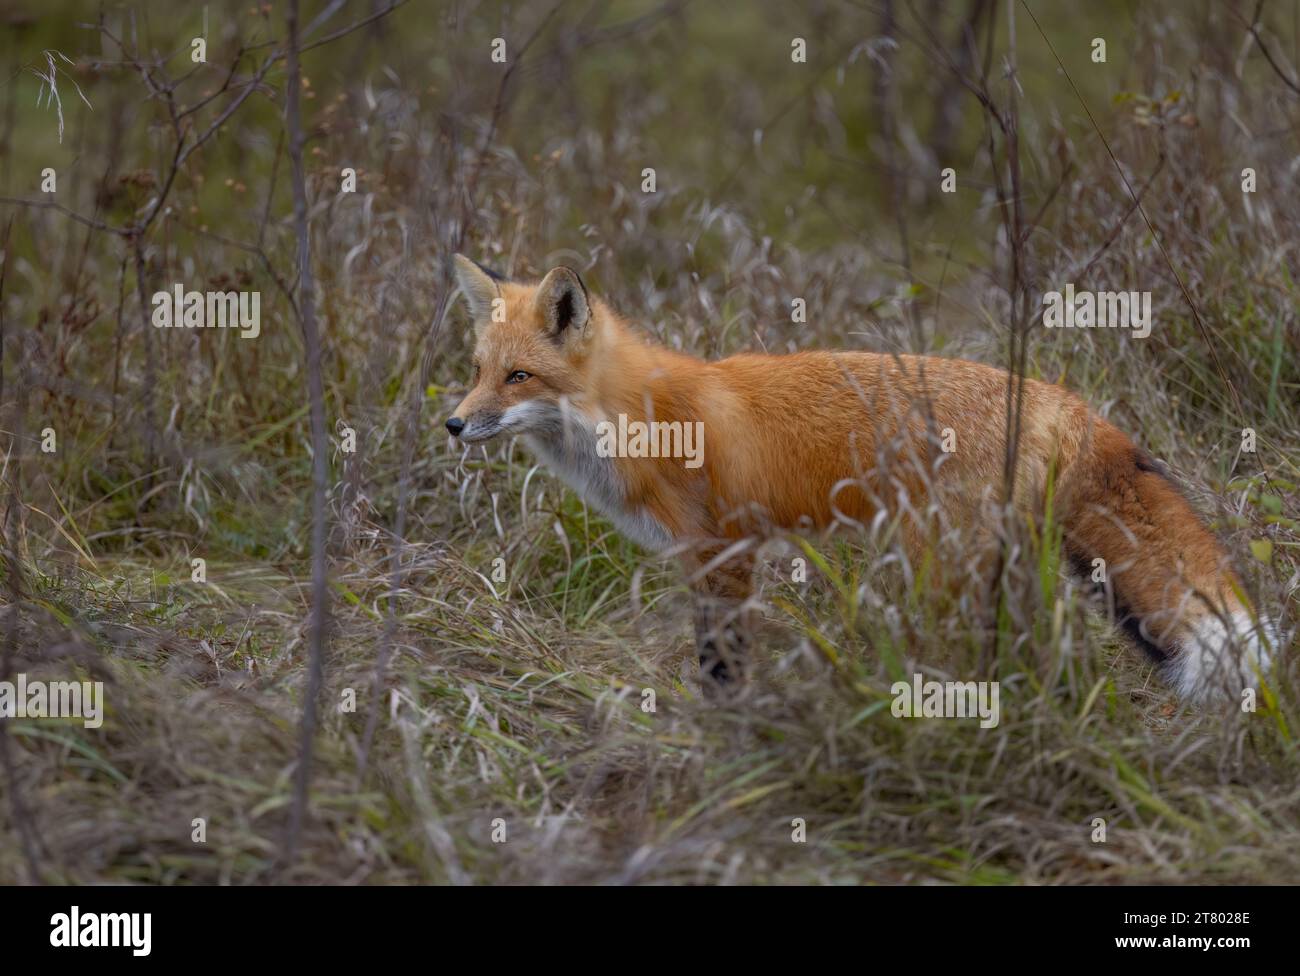 A young red fox walking through the grassy meadow in autumn. Stock Photo